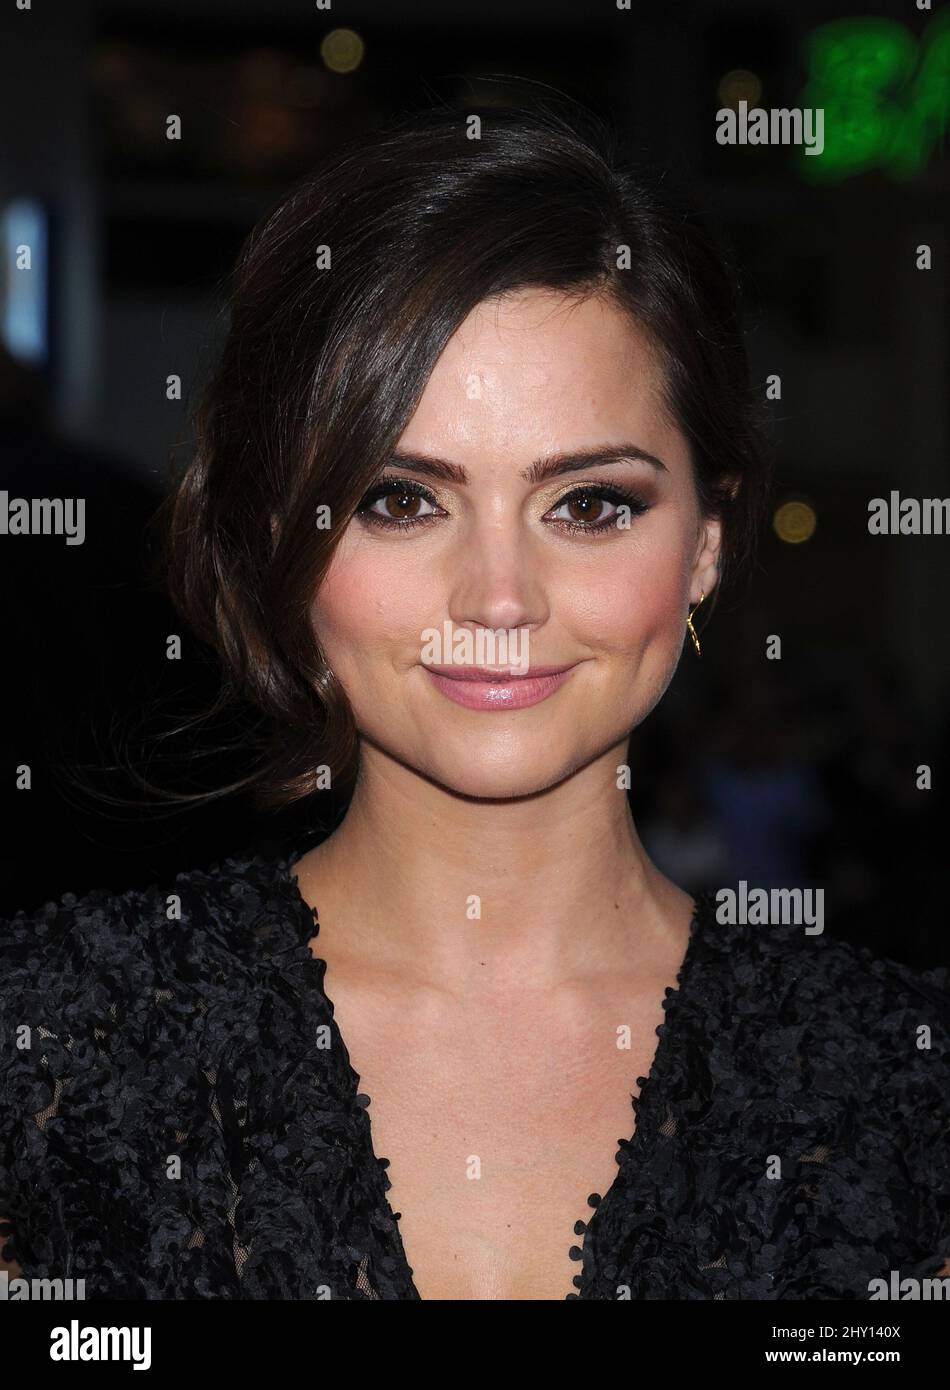 Jenna-Louise Coleman attending the season 3 premiere of the show 'Game Of Thrones' in Hollywood, California. Stock Photo